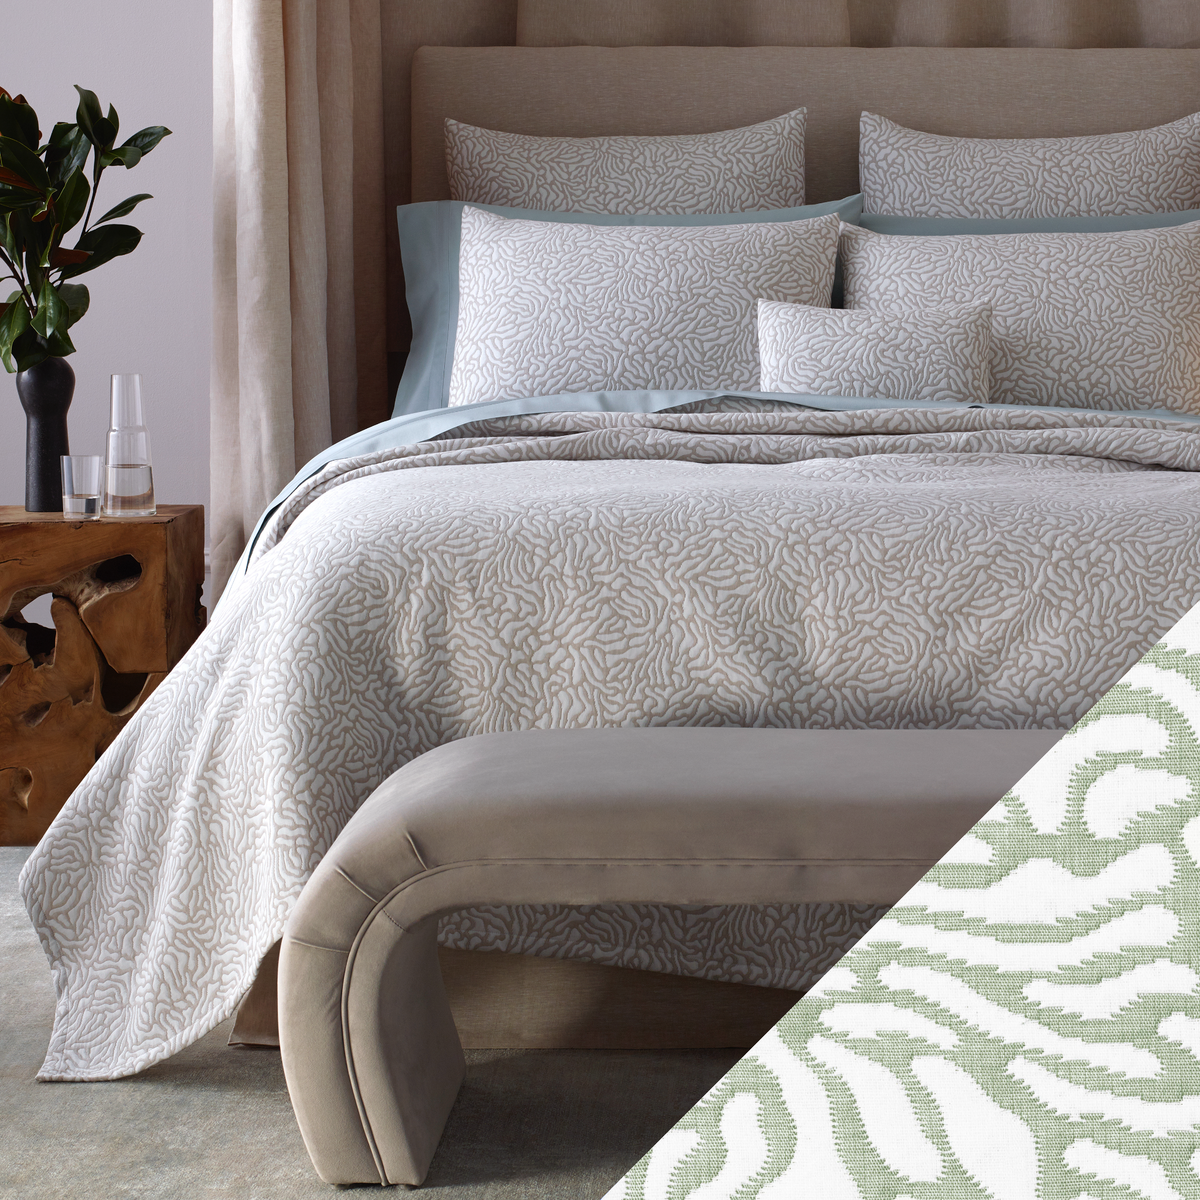 Full Bed Dressed in Matouk Schumacher Cora Bedding in Natural White Color with Grass Swatch